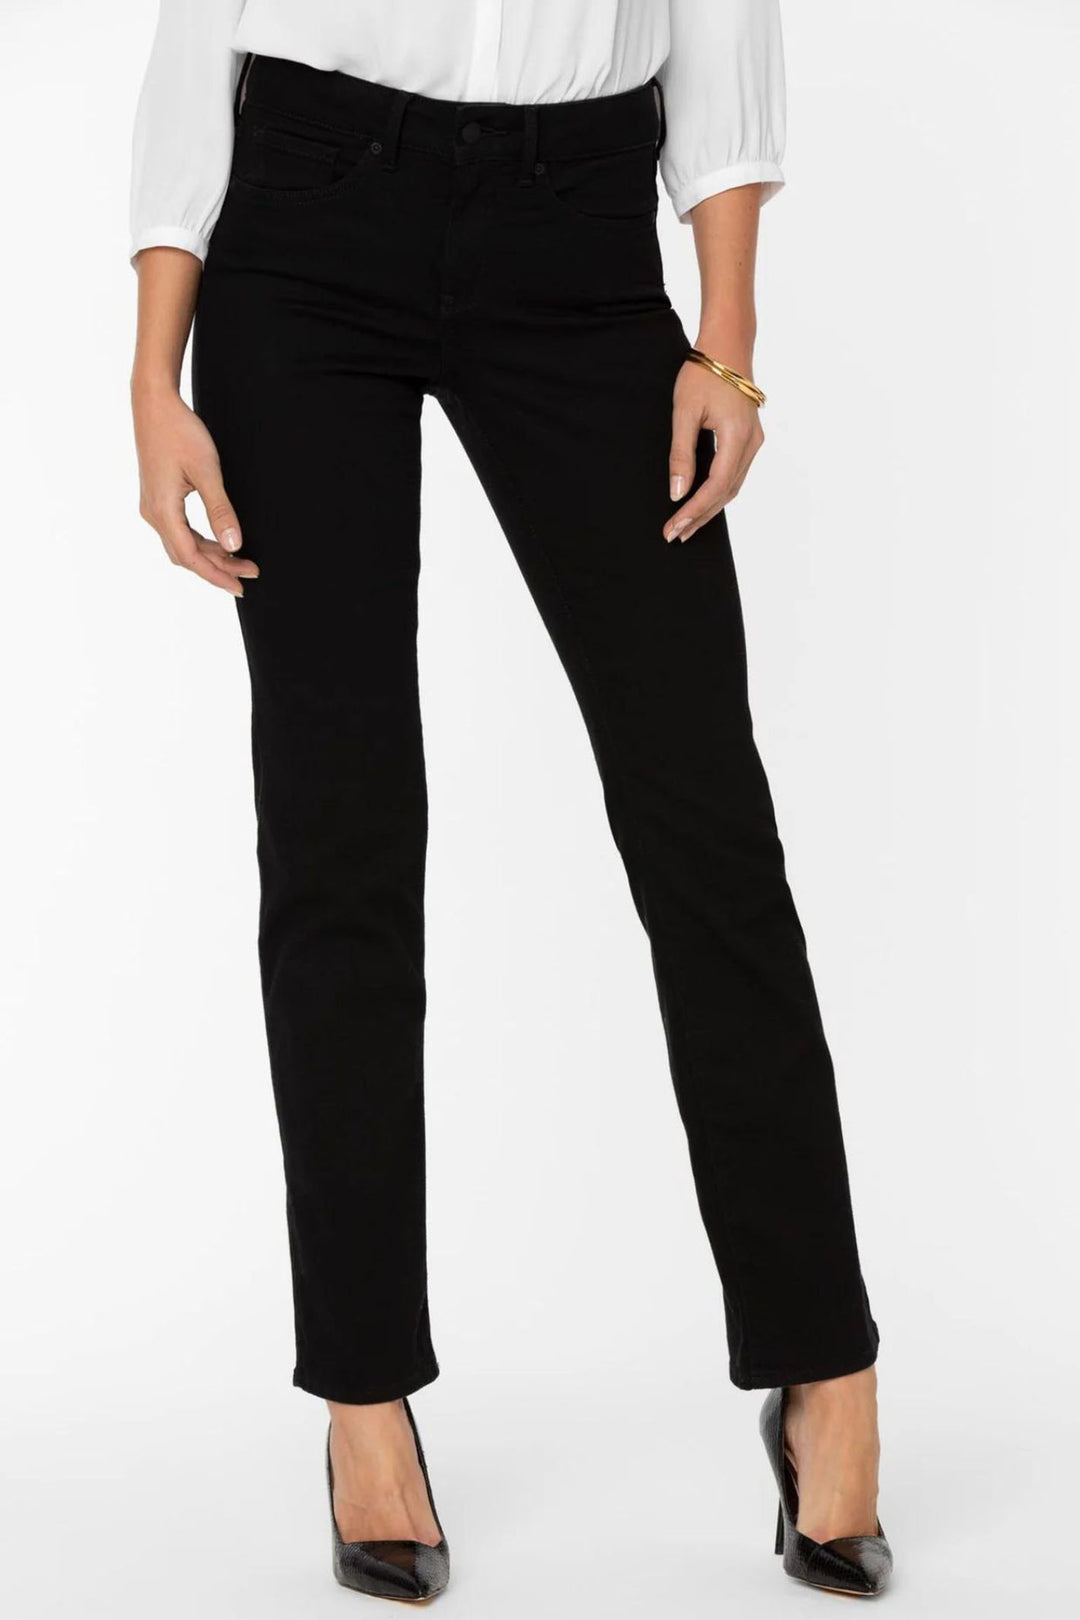 NYDJ Marilyn PNBBMS8517 Black Straight Short Leg Jeans - Experience Boutique